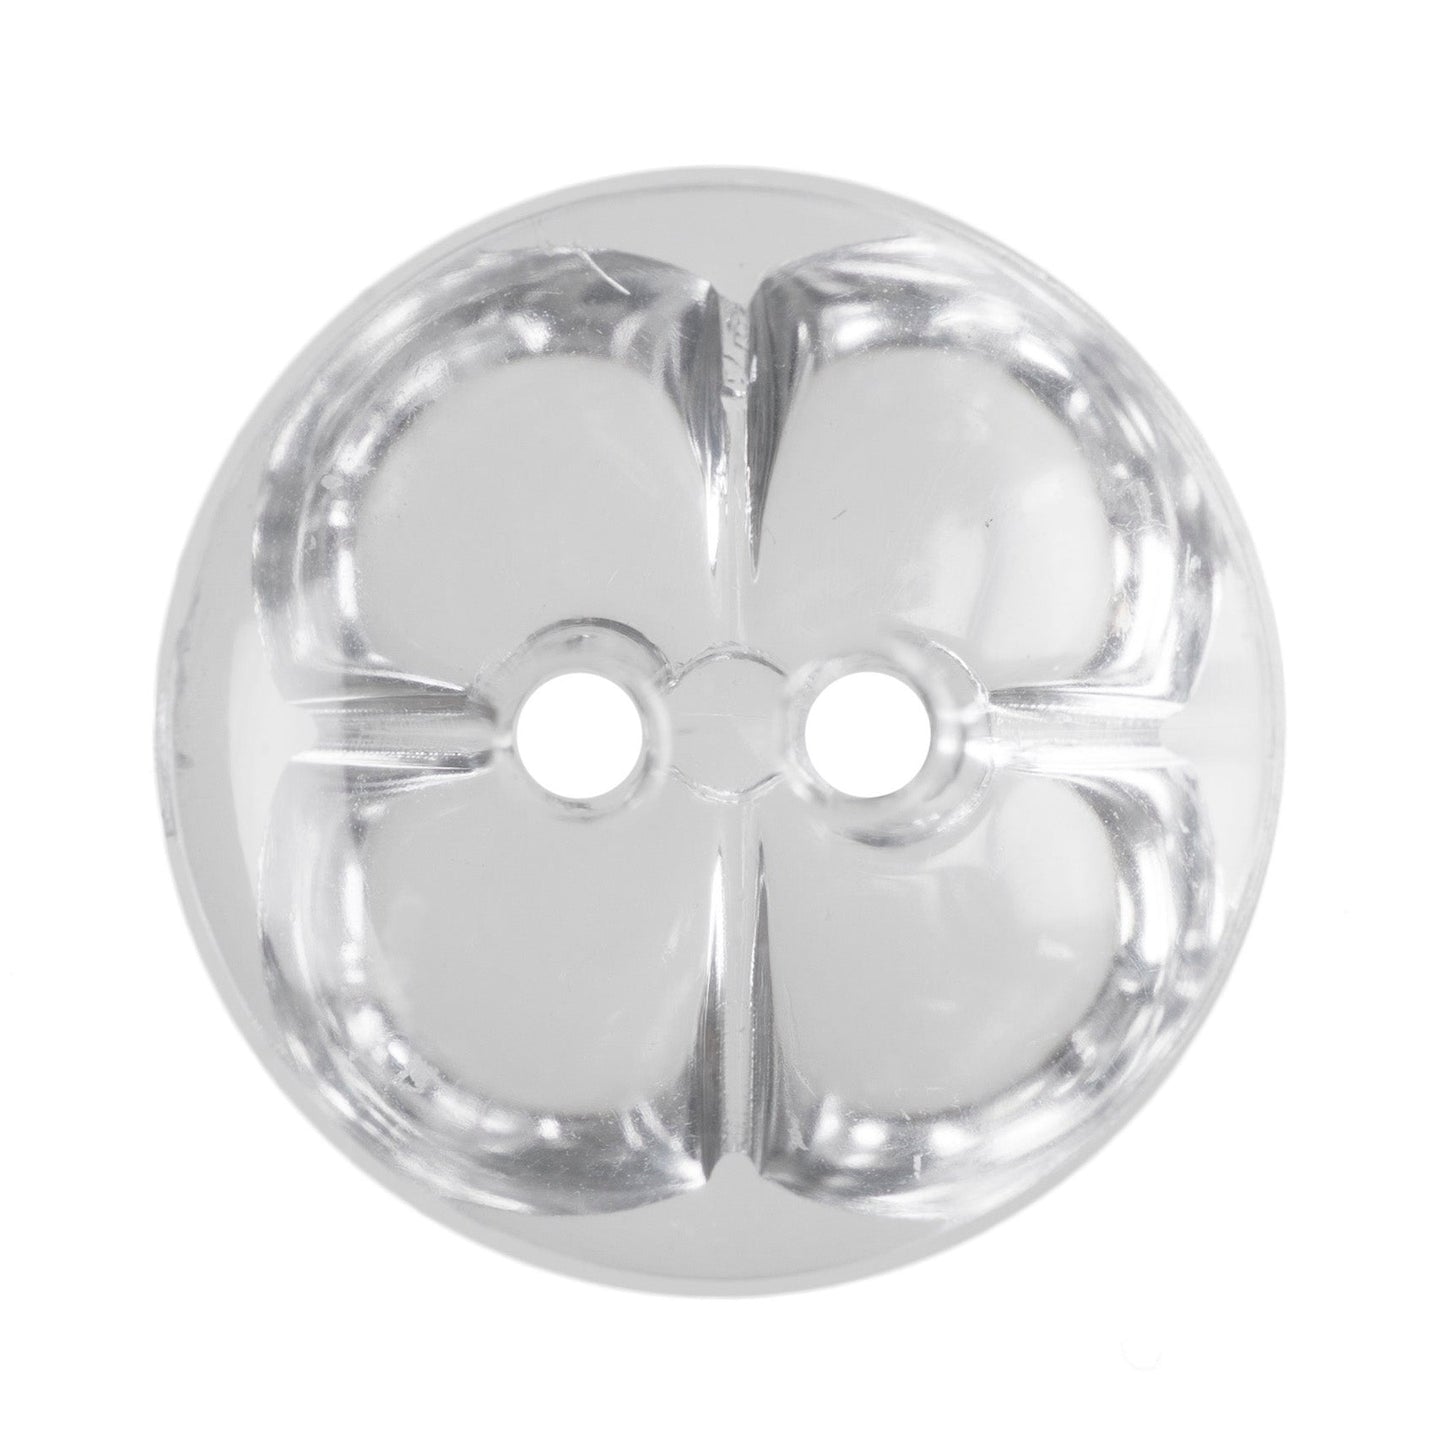 2 Hole Plastic Crystal Buttons - 20mm - Transparent